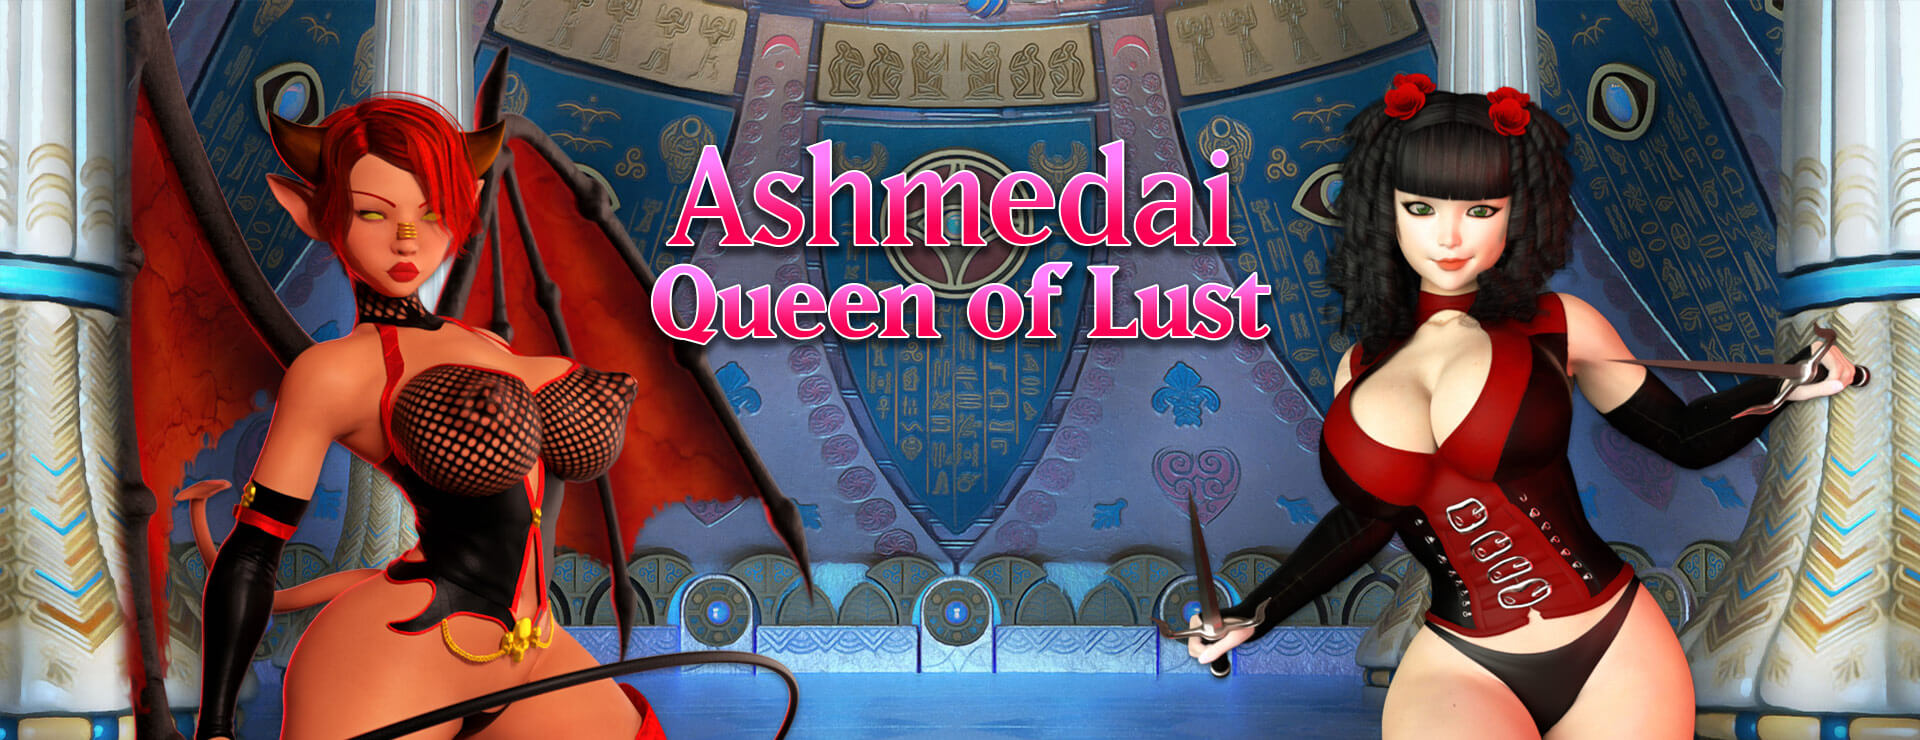 Ashmedai - Queen of Lust - RPG Juego